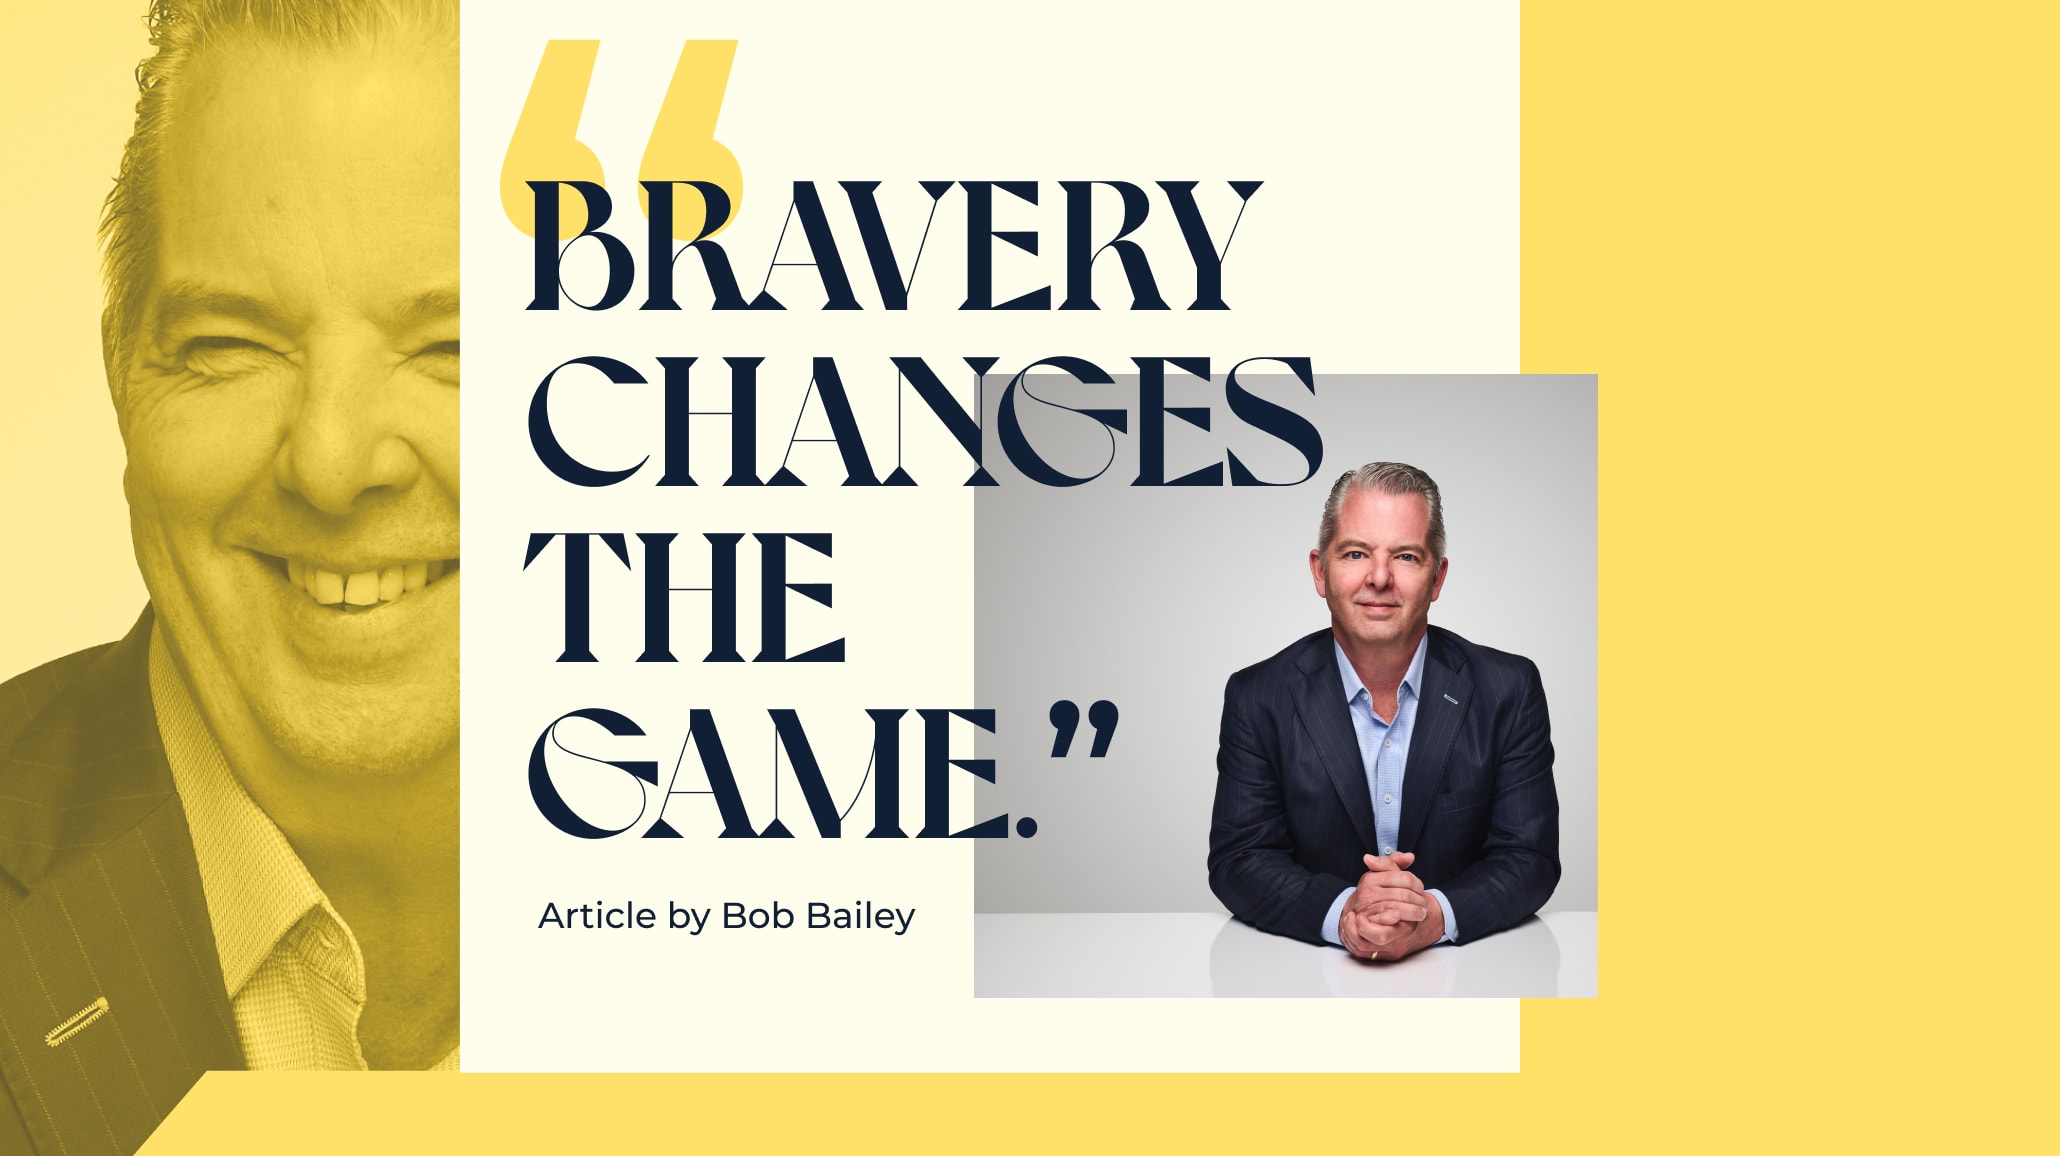 An image of Bob Bailey with a quote overlay that says "Bravery changes the game".